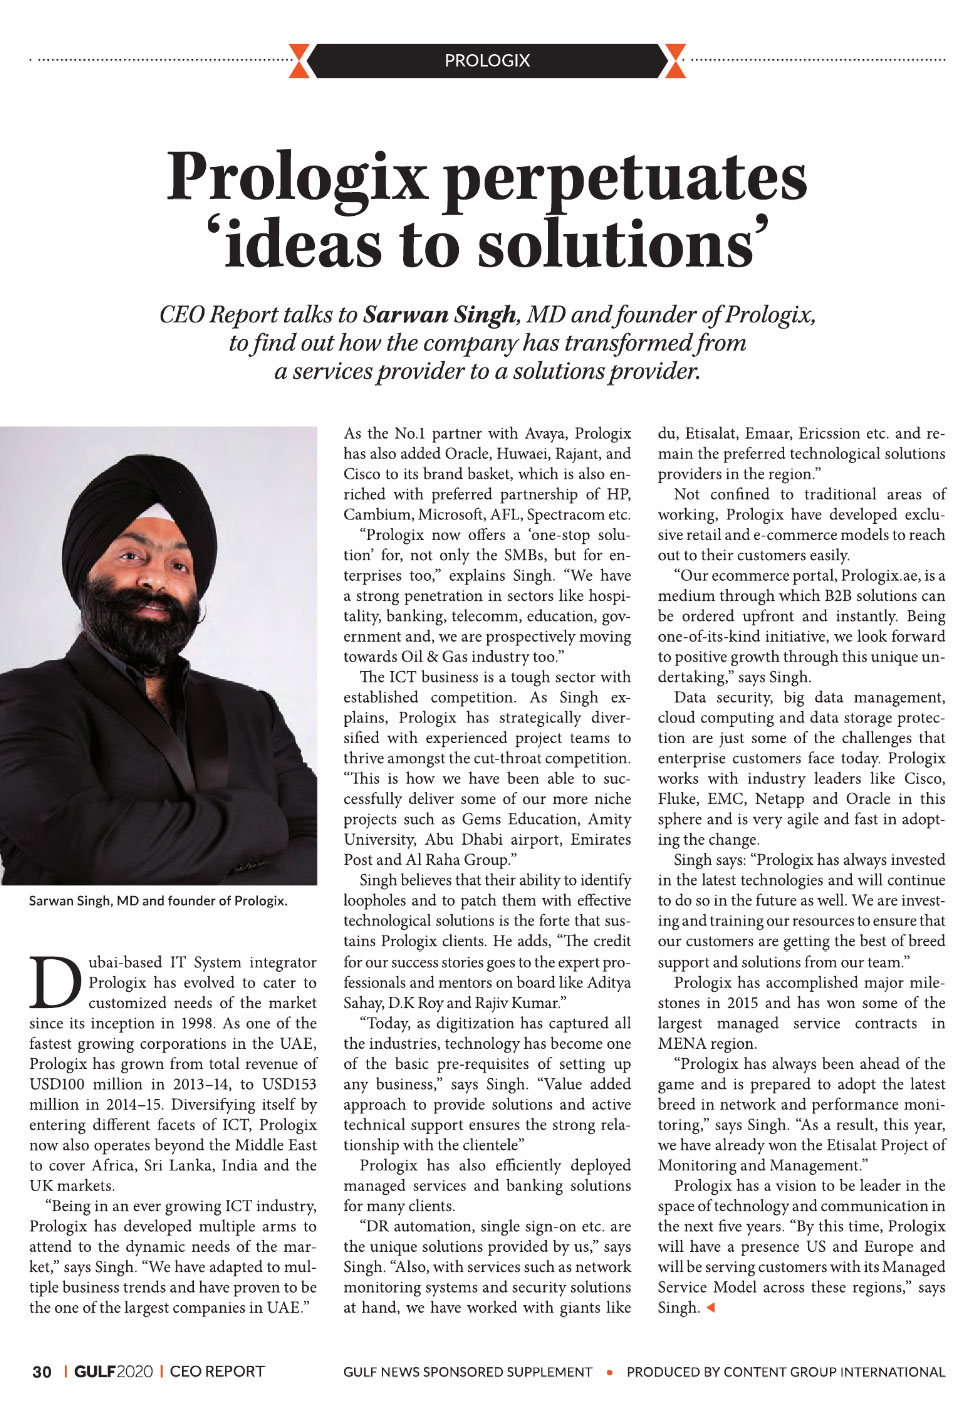 Prologix perpetuates ideas to solutions